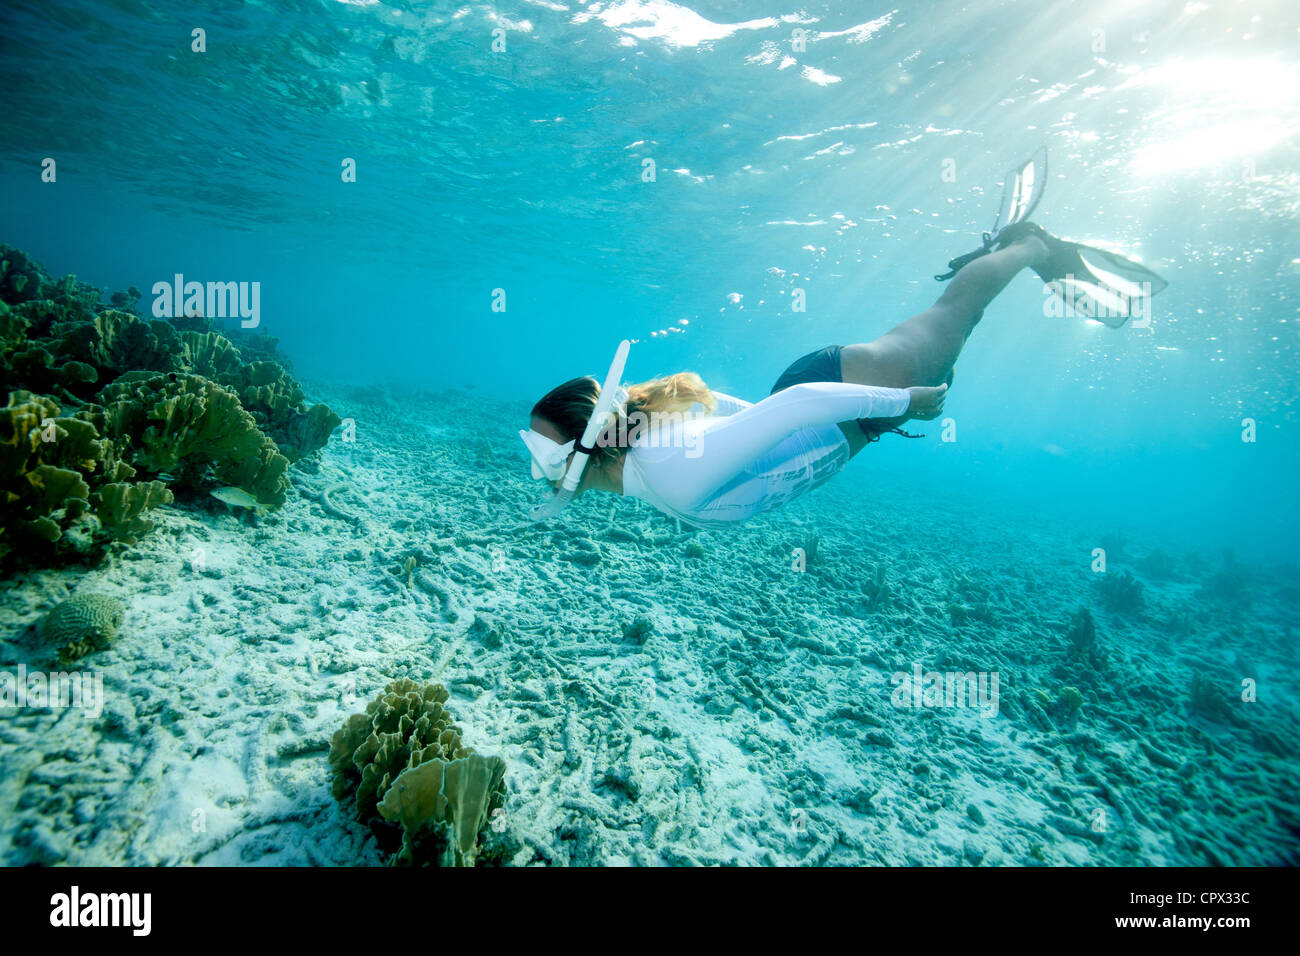 Snorkeler approaches coral reef Stock Photo